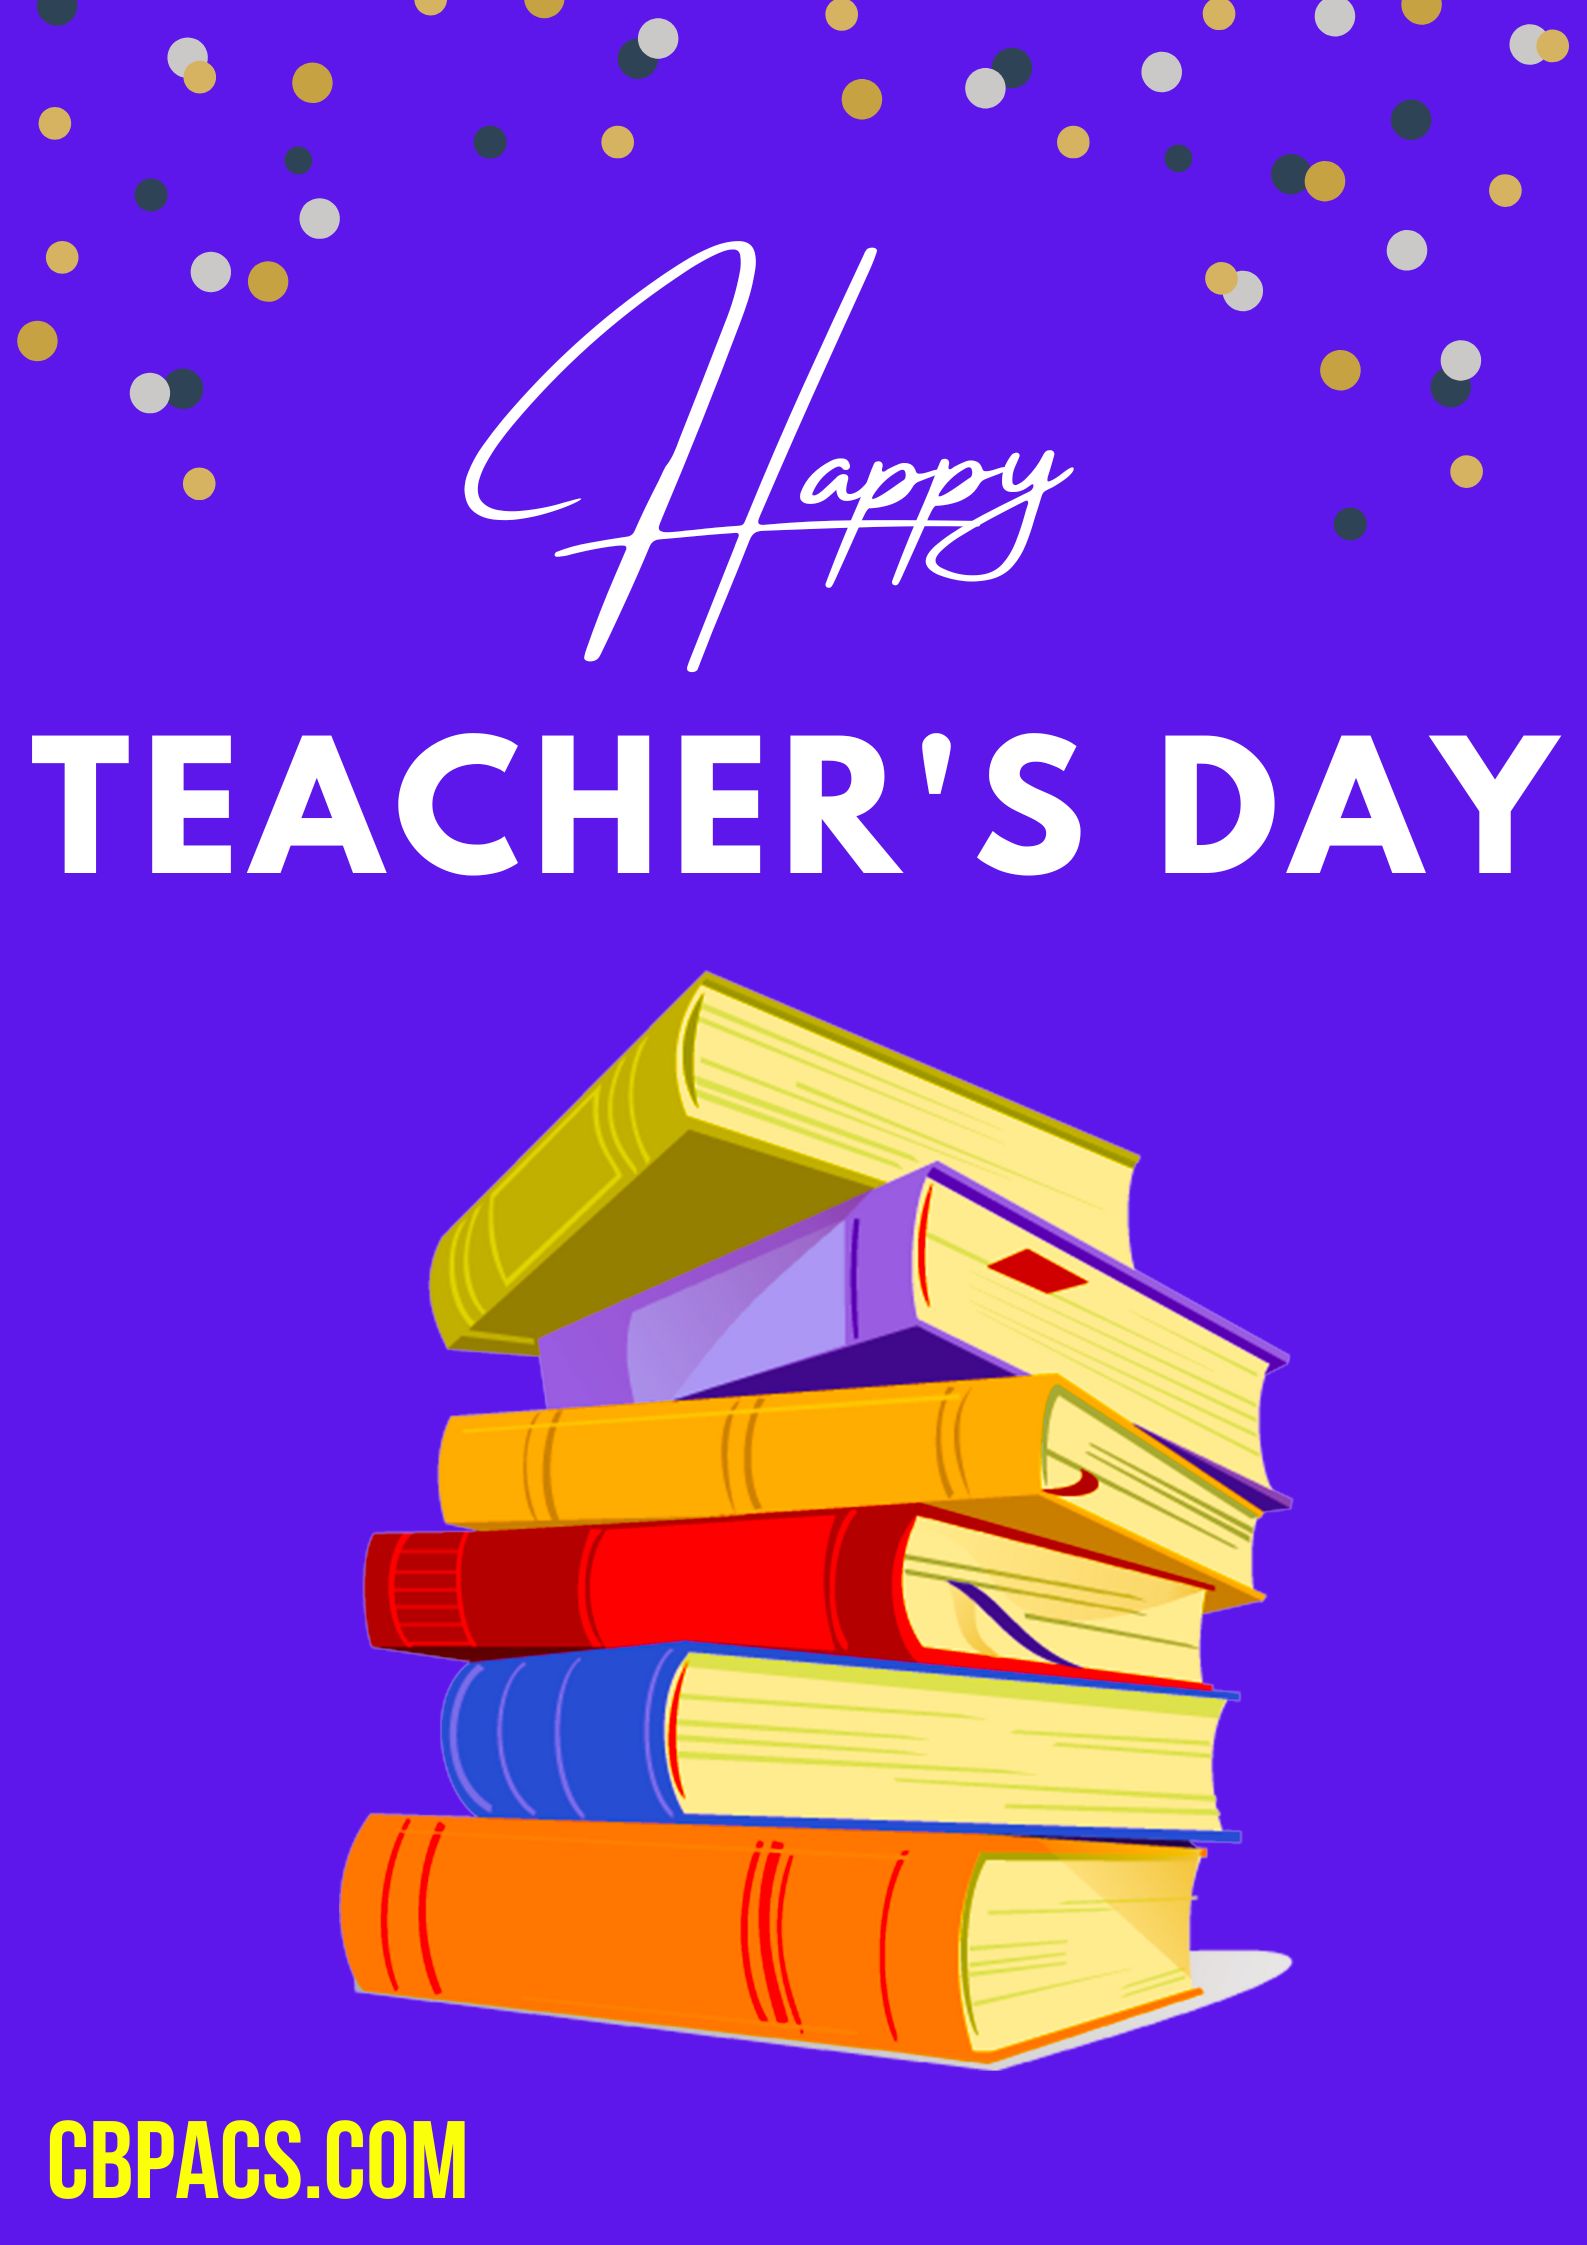 Happy Teachers Day 2022 Wishes, Quotes, Image Download